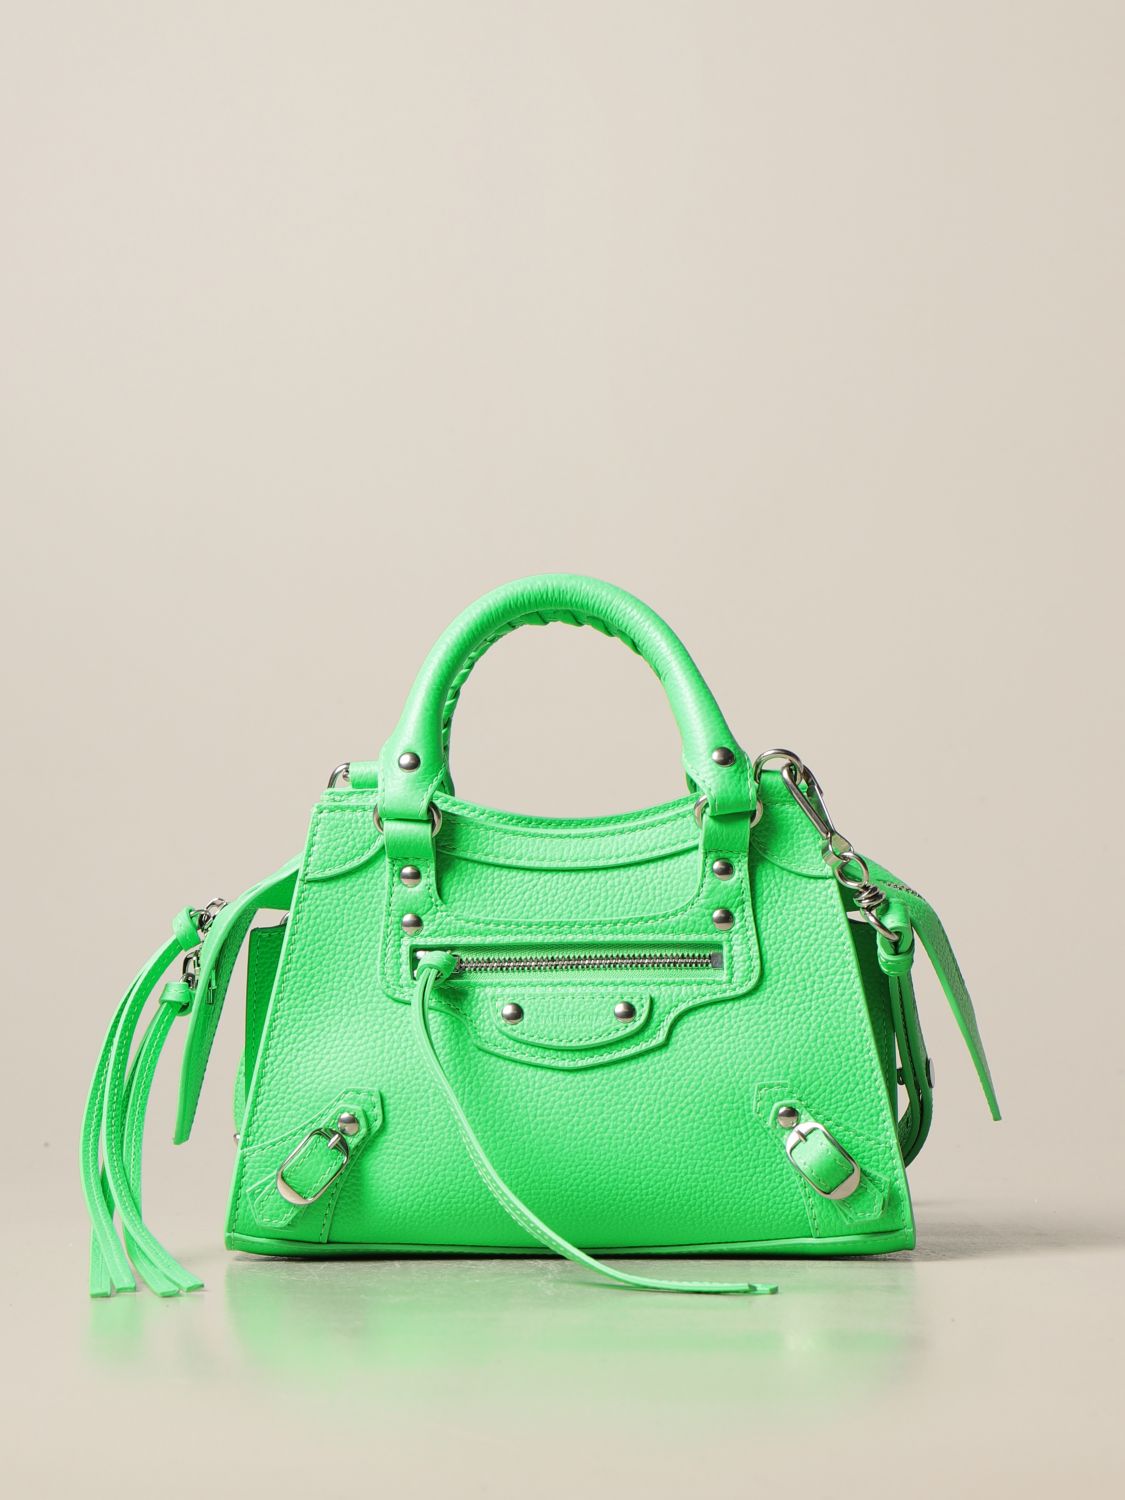 Balenciaga Classic City in Pommier Green Agneau with Aged Brass Hardware   SOLD